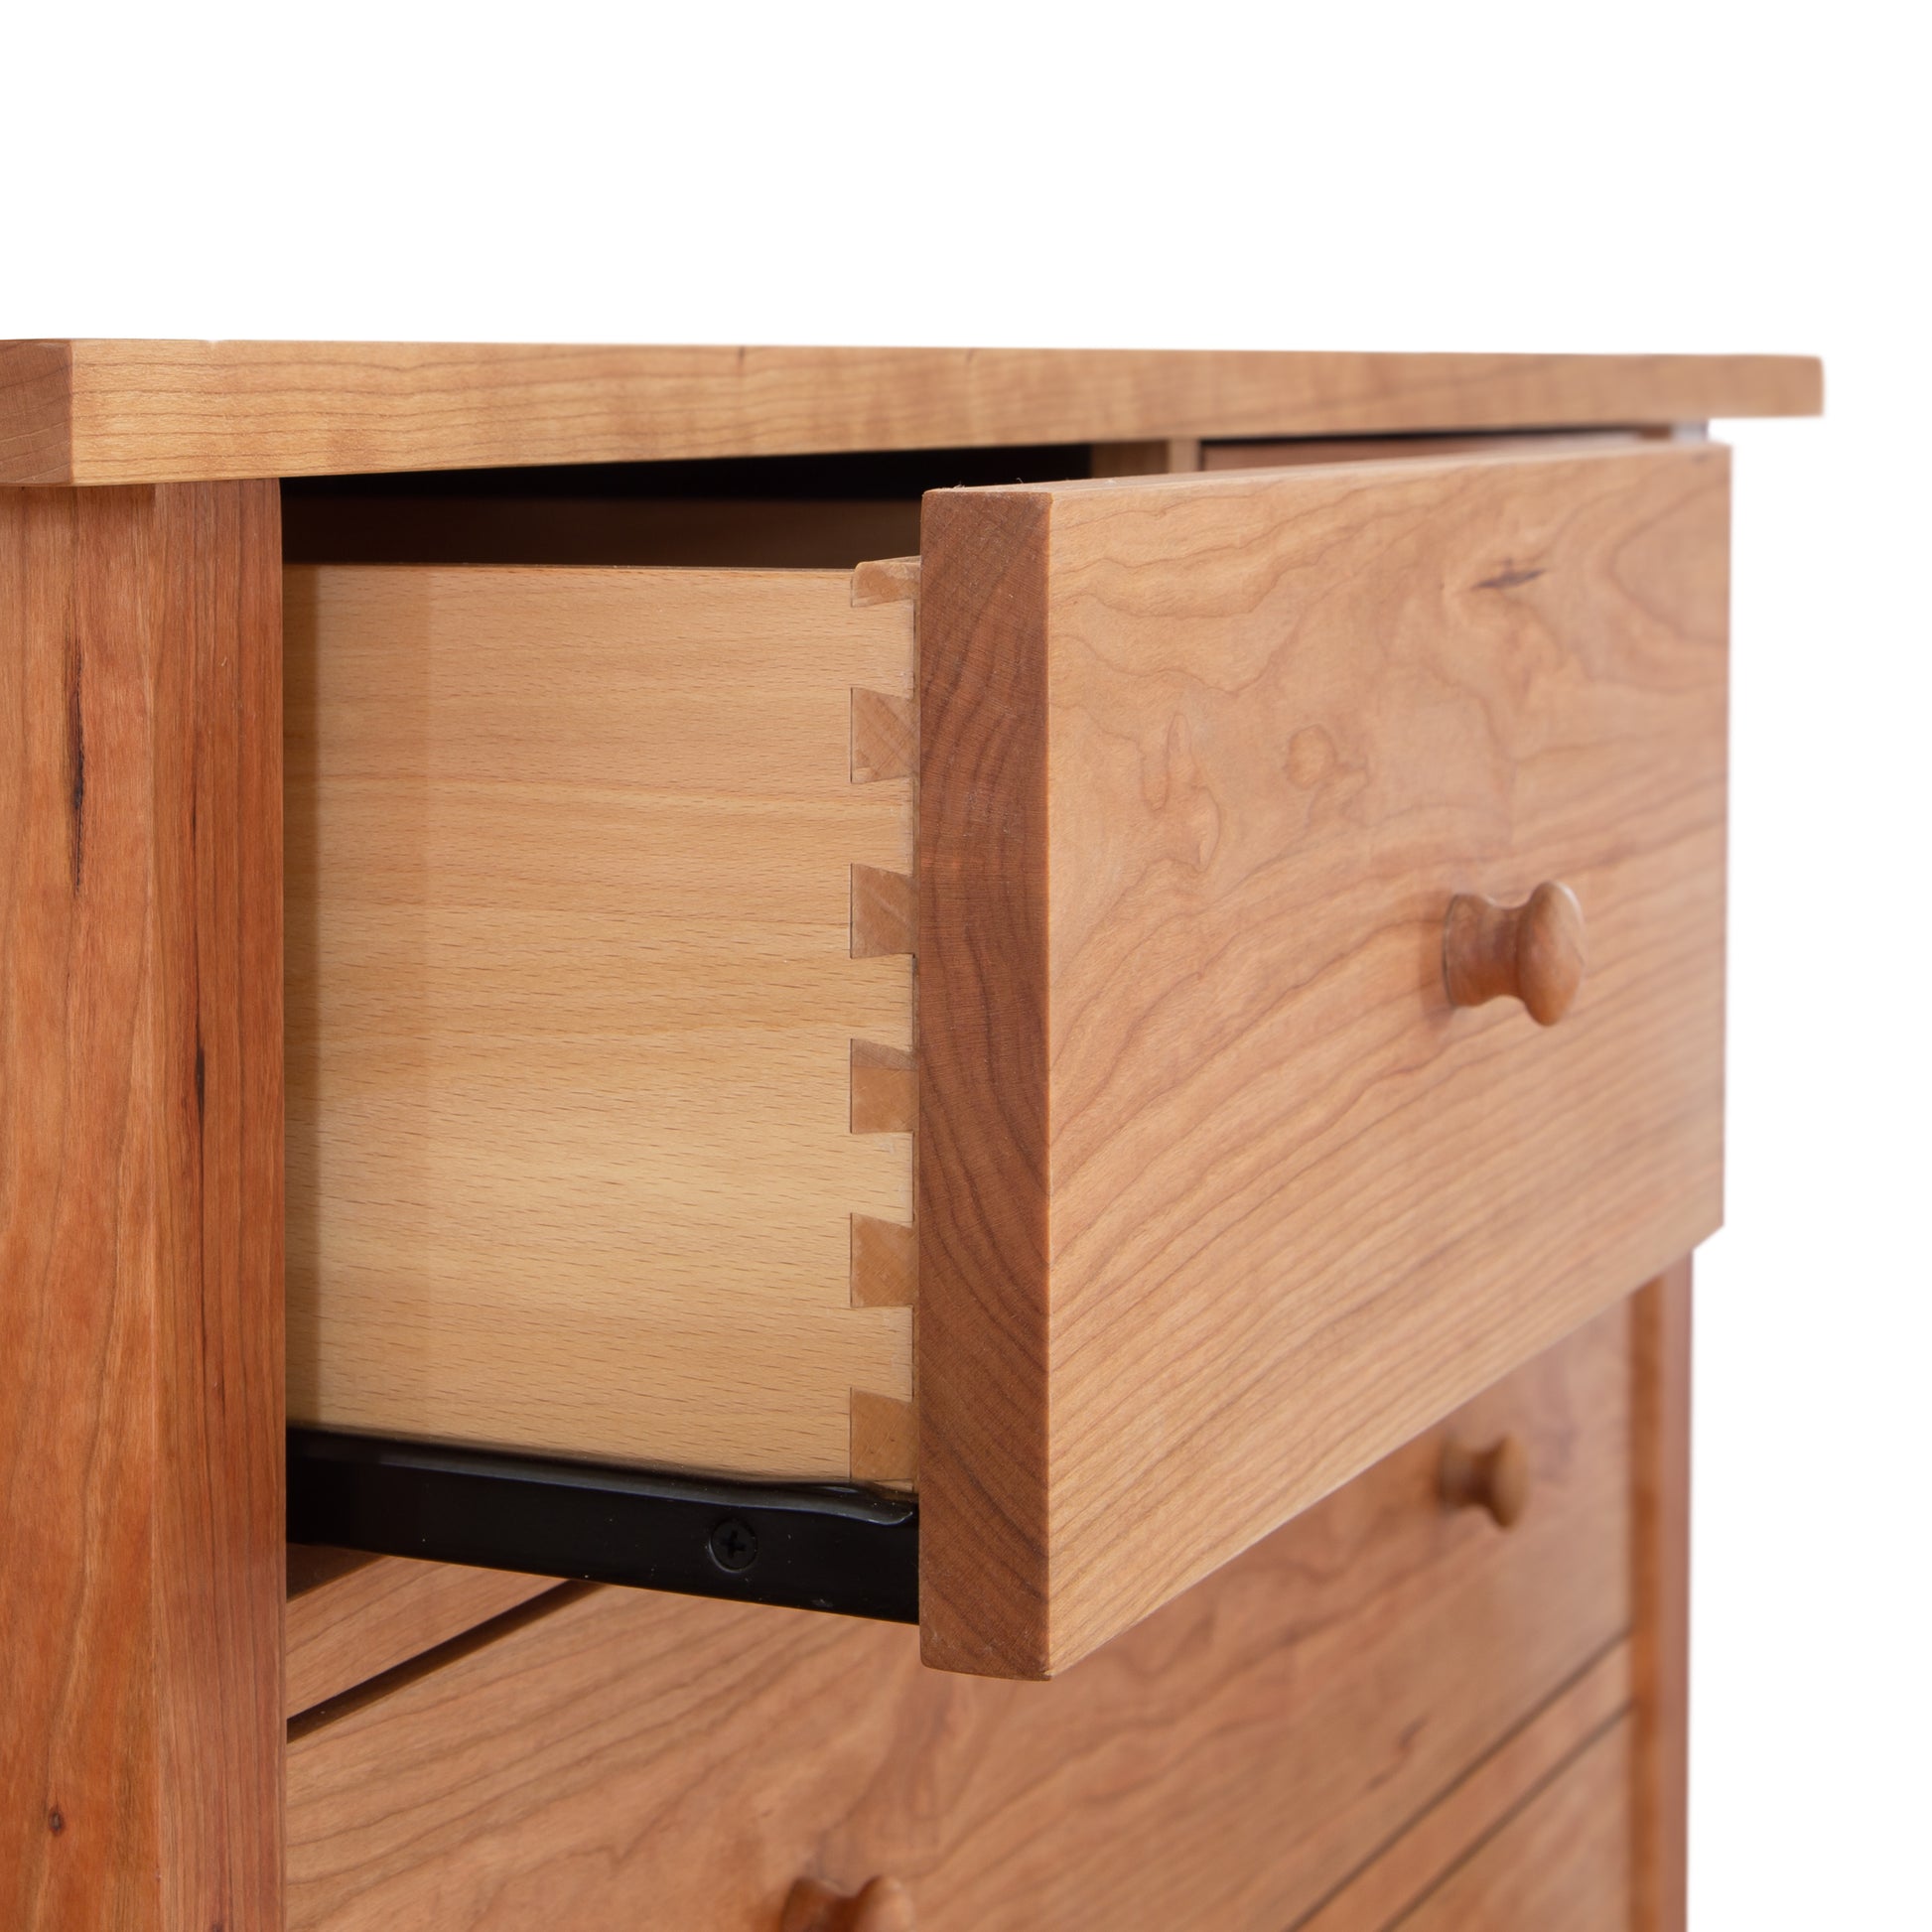 A Vermont Furniture Designs Burlington Shaker 7-Drawer Chest partially opened, revealing dovetail joints and a smooth interior finish.